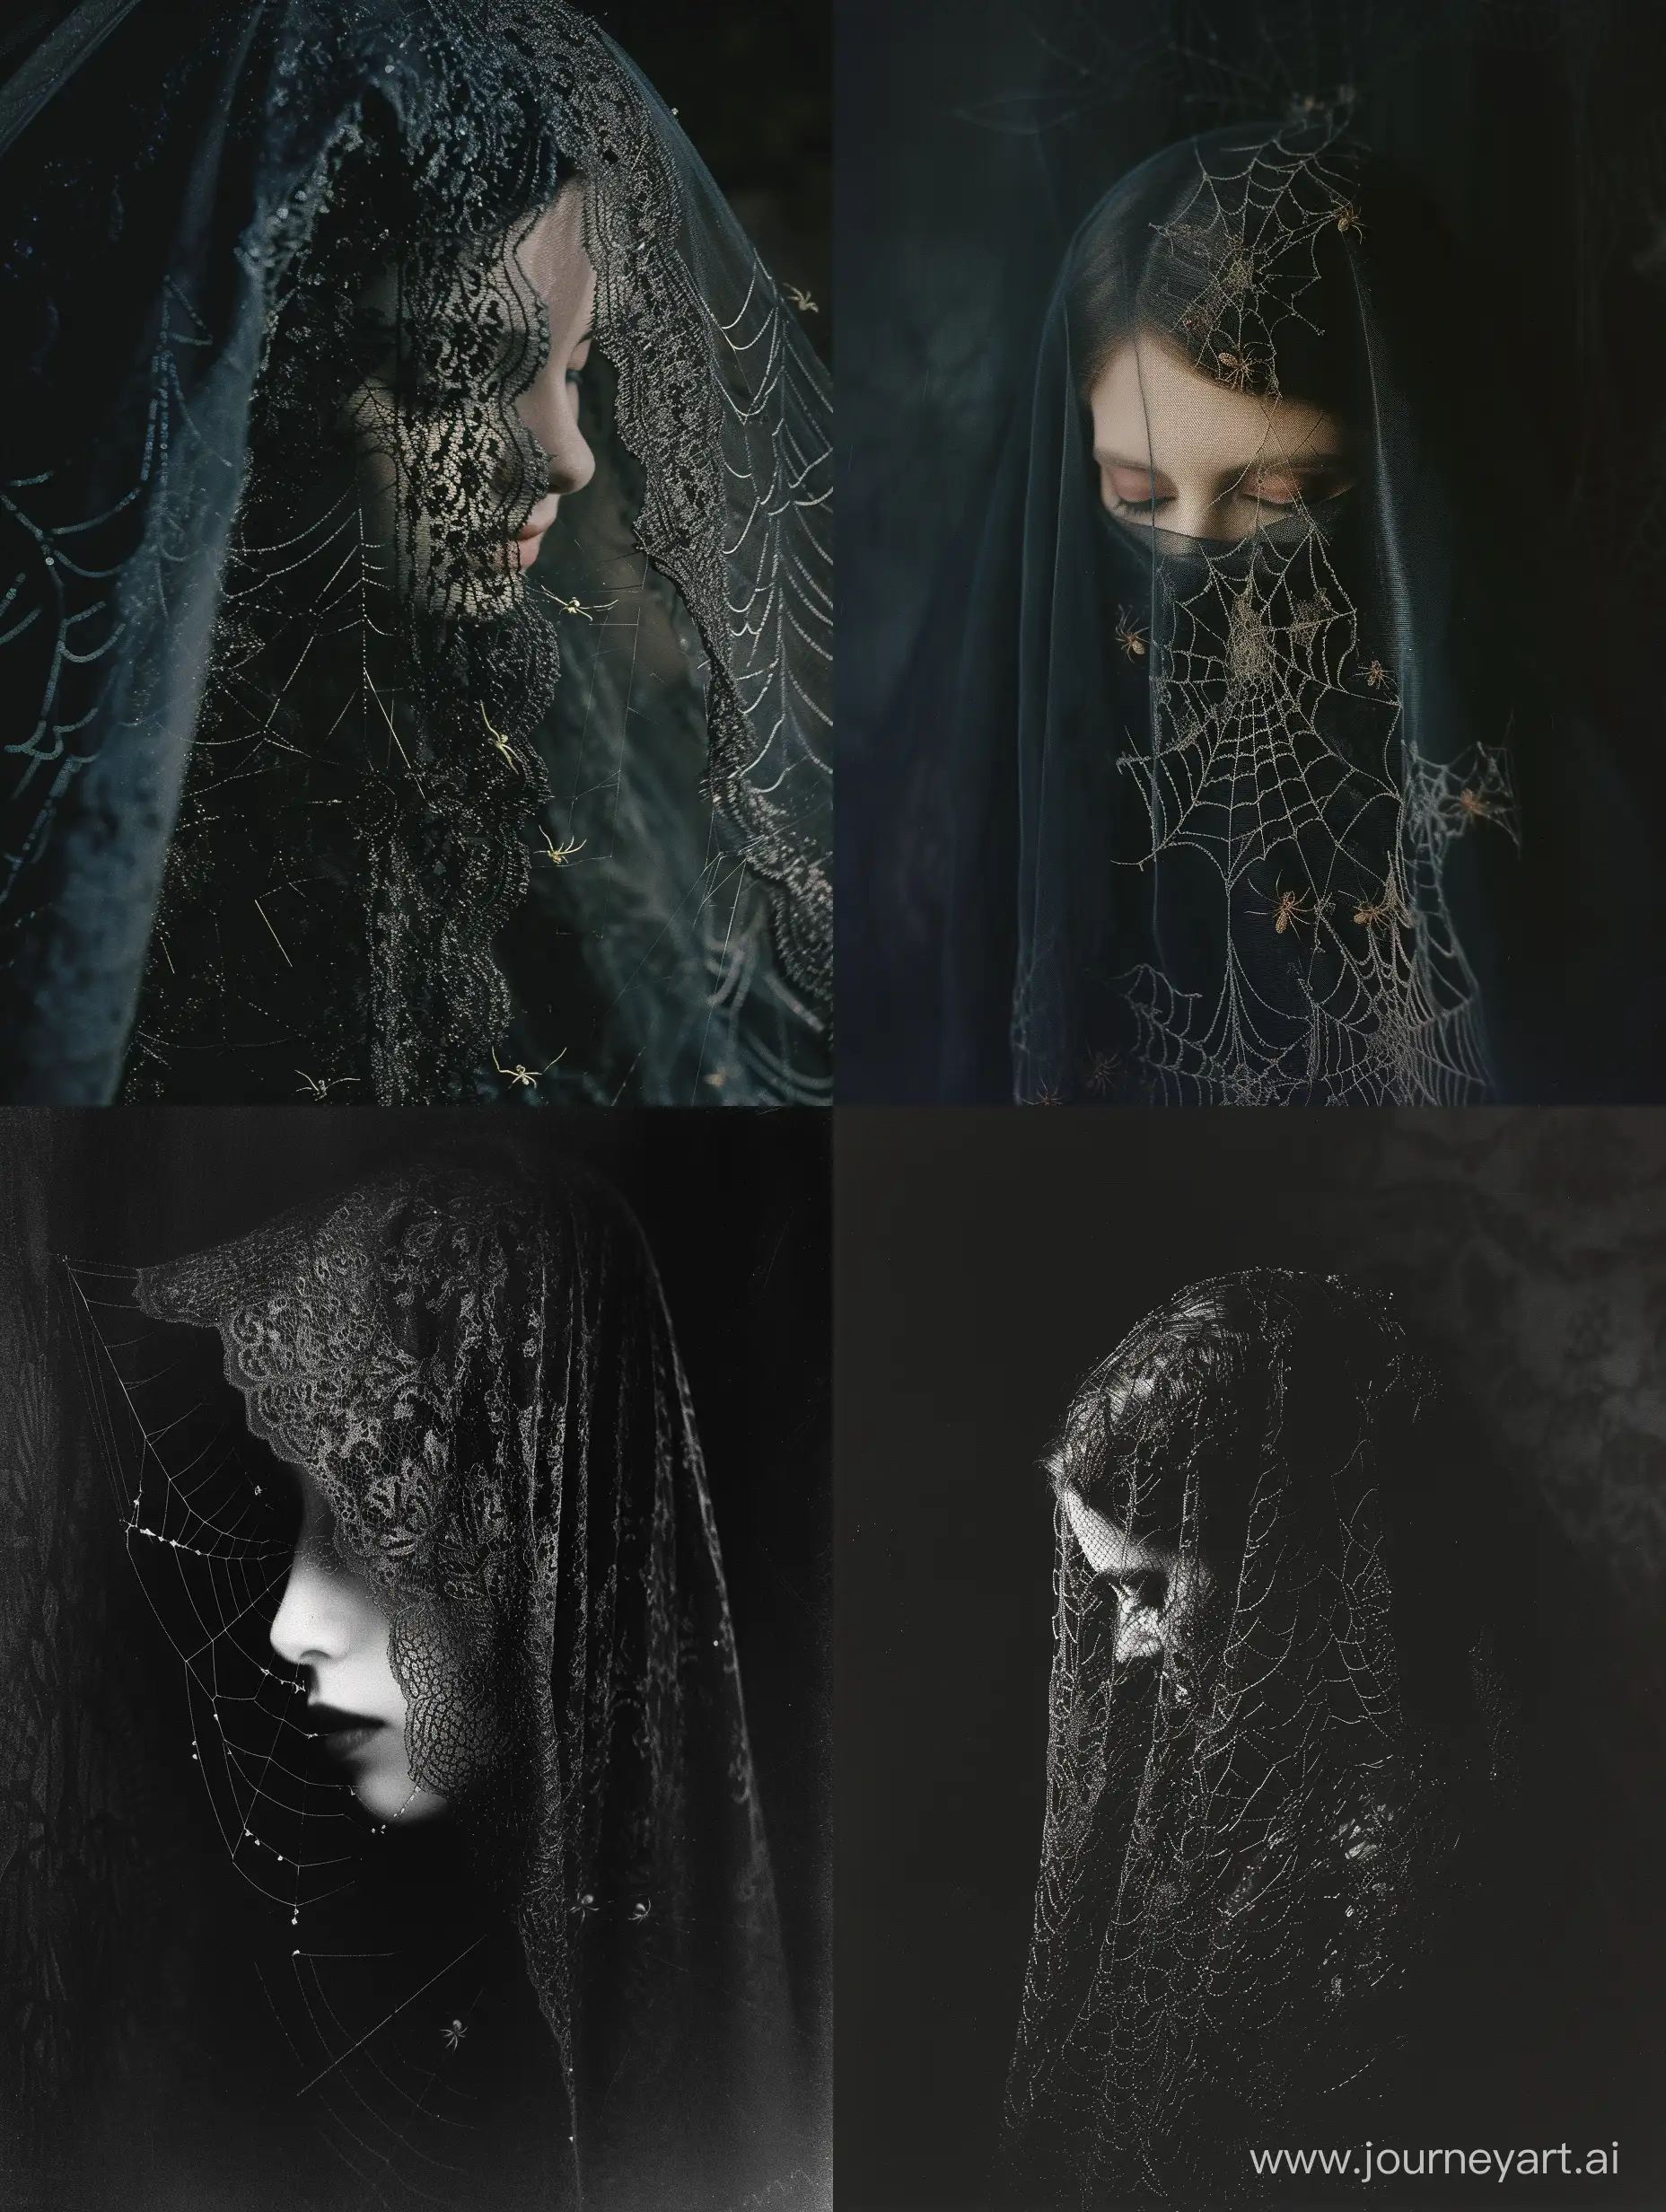 A saturated photo of a bewitching woman shrouded in darkness, her face concealed by a delicate lace veil. The veil, saturated with an eerie aura, becomes a haunting canvas for spiders that crawl and weave their intricate webs. The expired film saturates the image, intensifying the dark aesthetics and lending an air of mystery to the scene. Against the backdrop of a pitch-black abyss, the woman stands as a mesmerizing embodiment of folk horror and occult core. Secret keywords: "Enigmatic Veil," "Arachnid Elegance," "Shadowed Intrigue." Pagan horror, occult core, dark aesthetic, taken on Provia